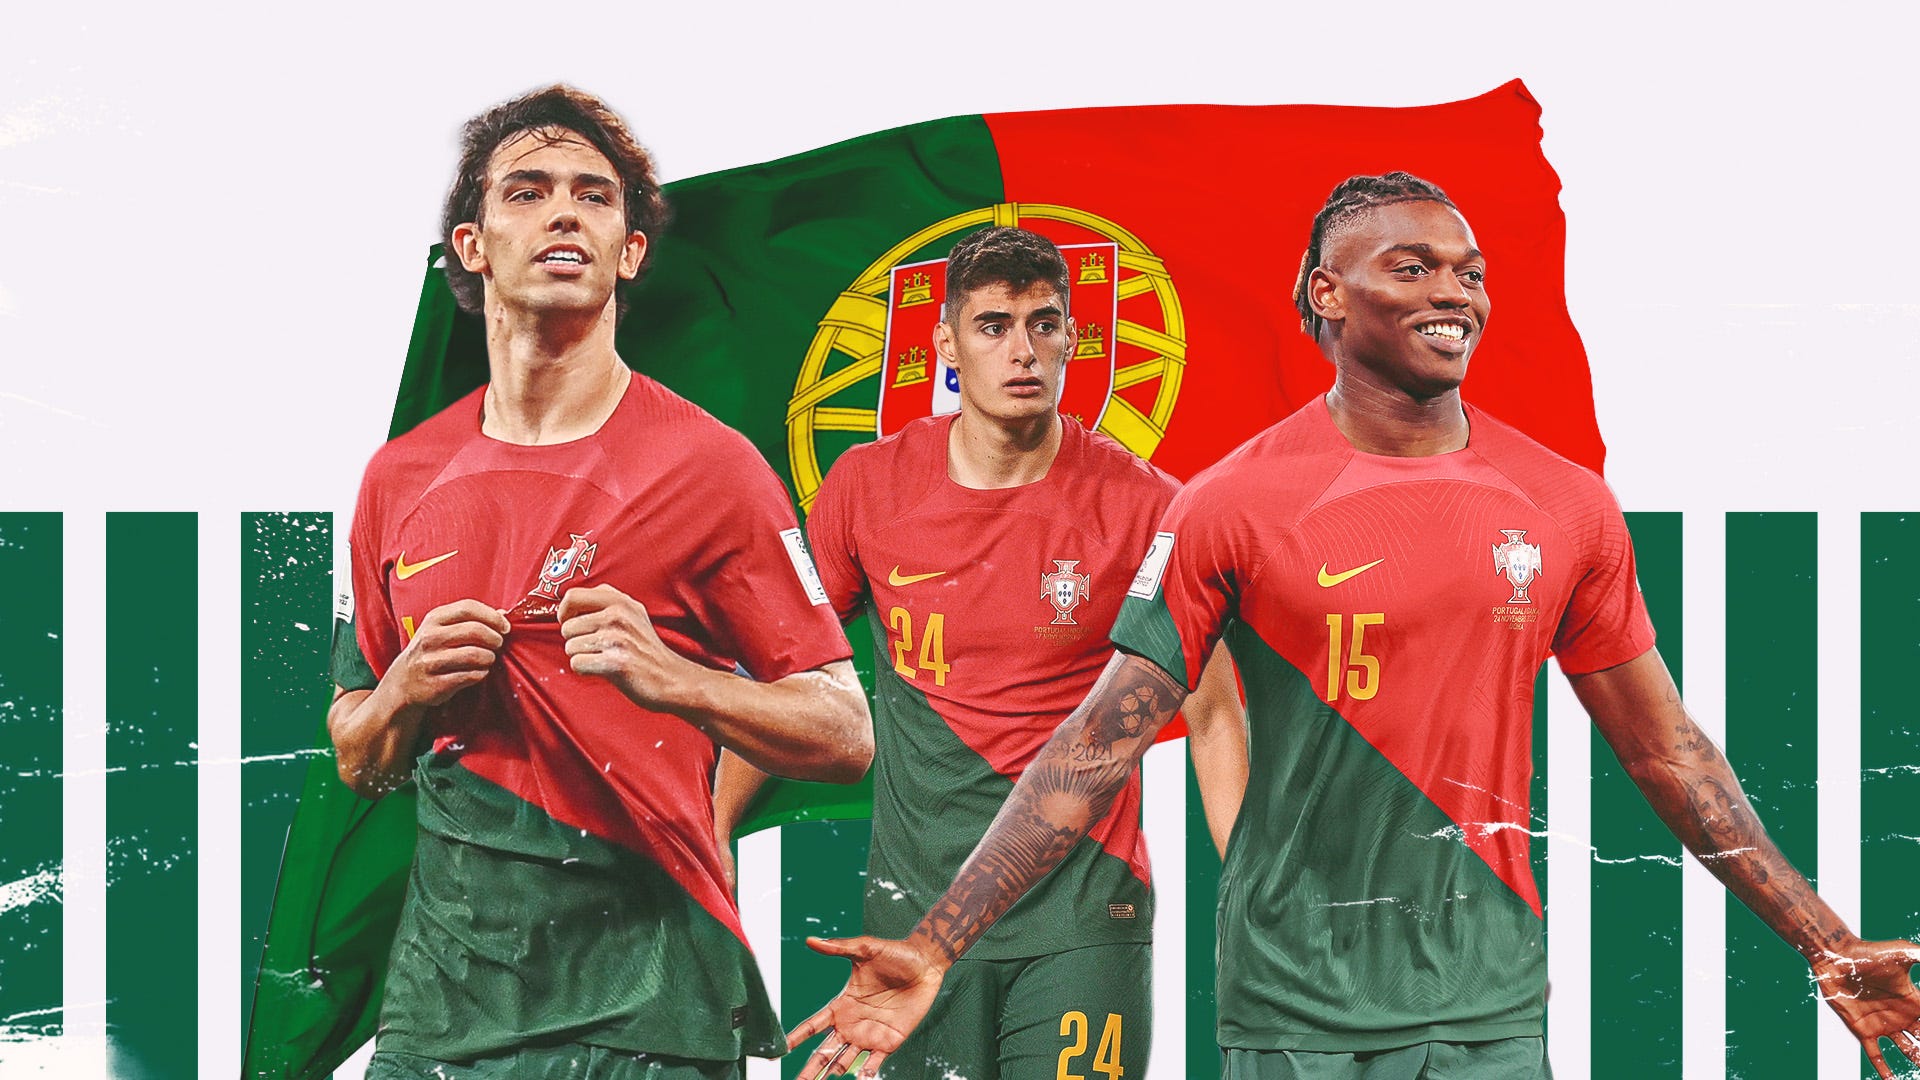 Ronaldo & Bruno Fernandes out, Leao & Ramos in How will Portugal line